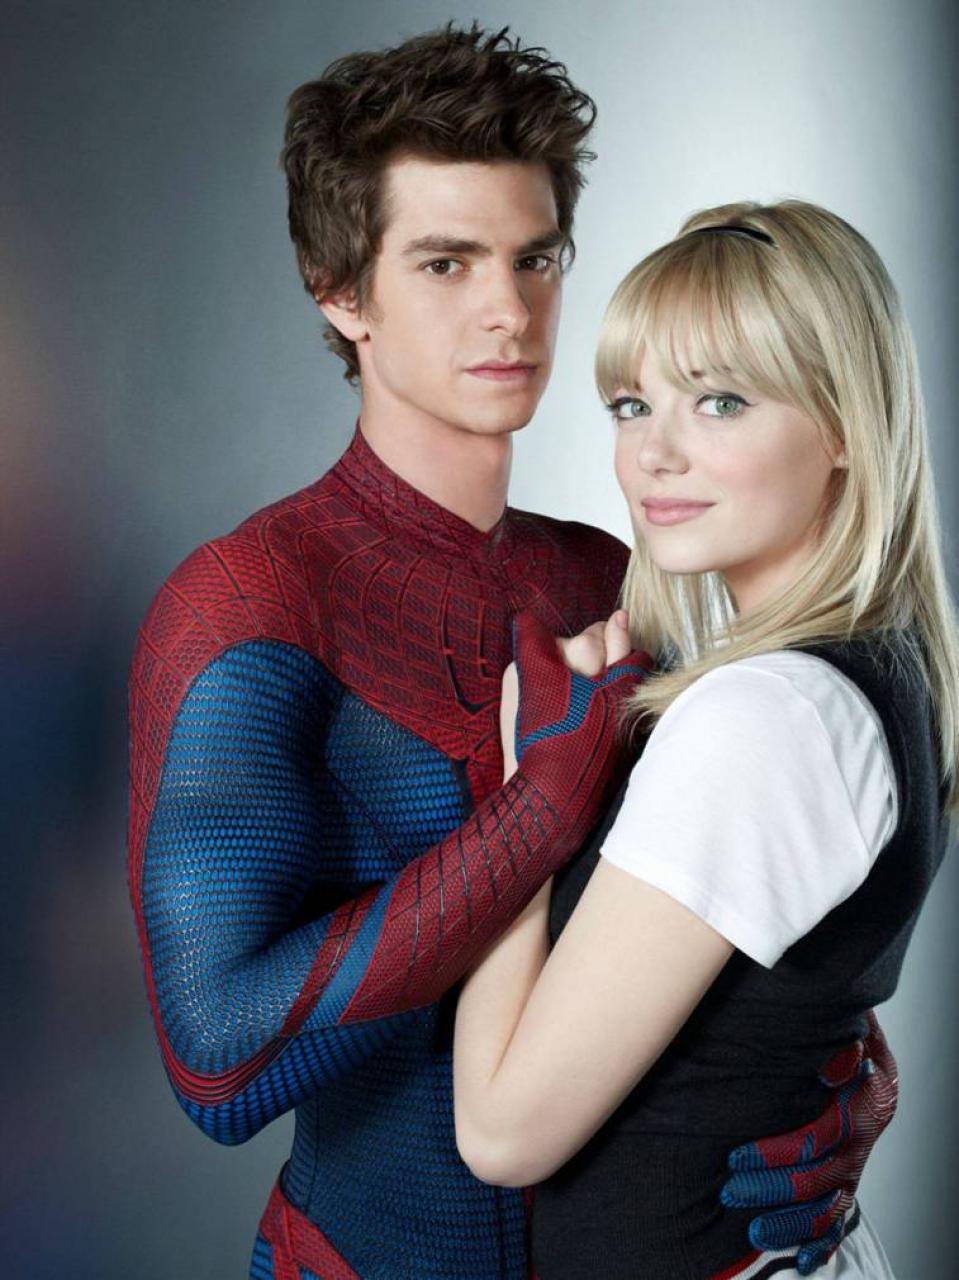 Andrew Garfield stars as Peter Parker/Spider-Man and Emma Stone stars as Gwen Stacy in Columbia Pictures' The Amazing Spider-Man (2012)